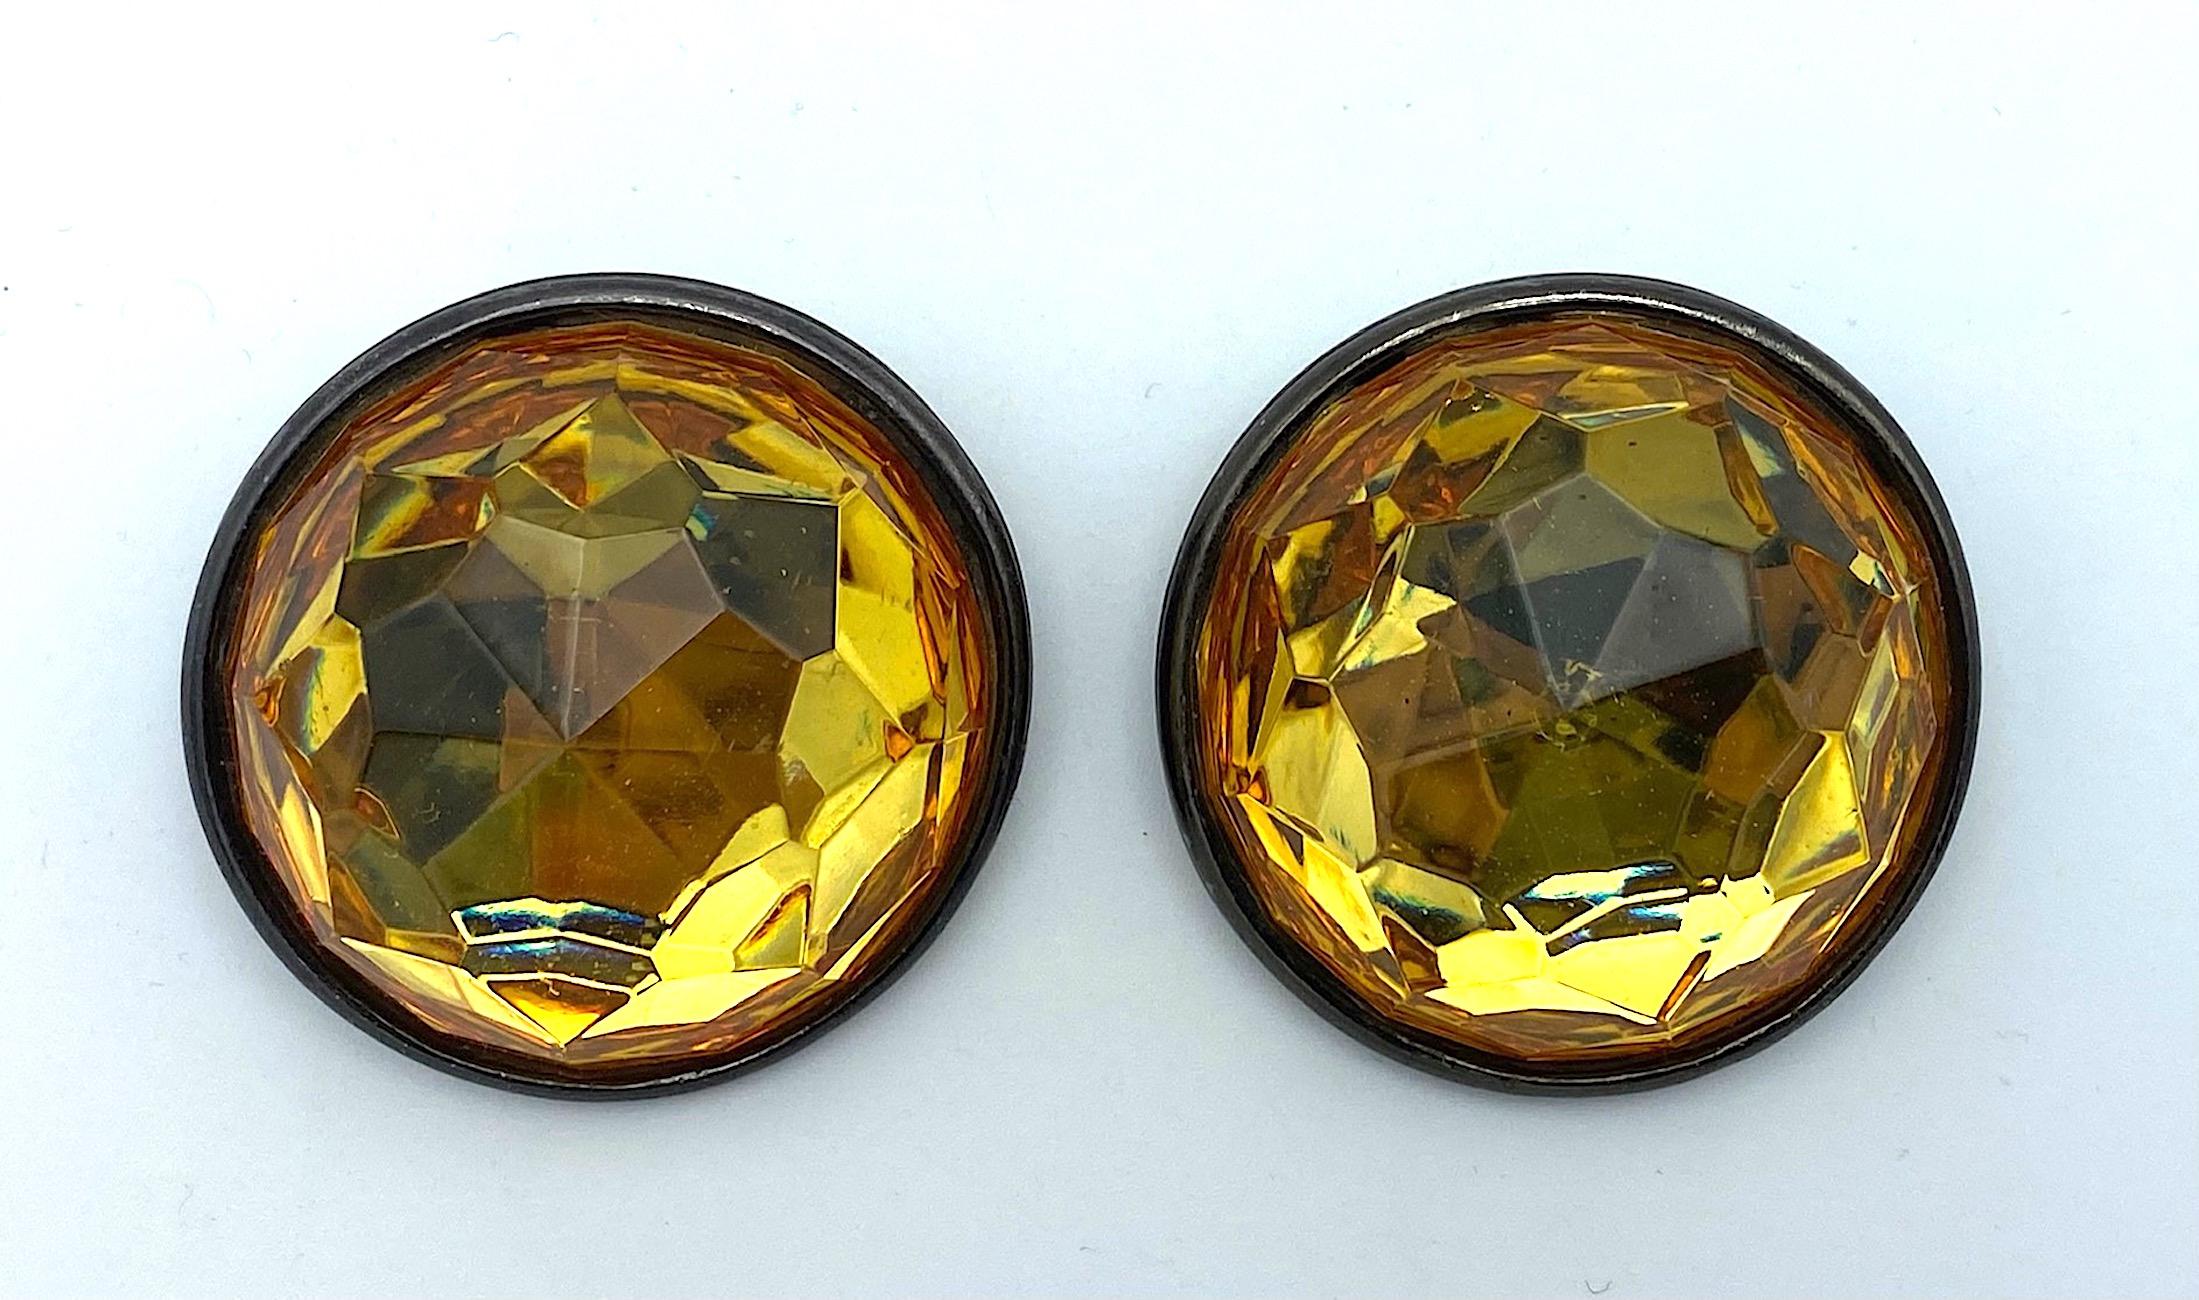 Truly a statement pair of Yves Saint Laurent earrings from the 1980s. Each earrings is 2 inches in diameter. The back are are a charcoal grey enamel on a martele textured metal disk. The fronts are large clear gold color faceted lucite dome or